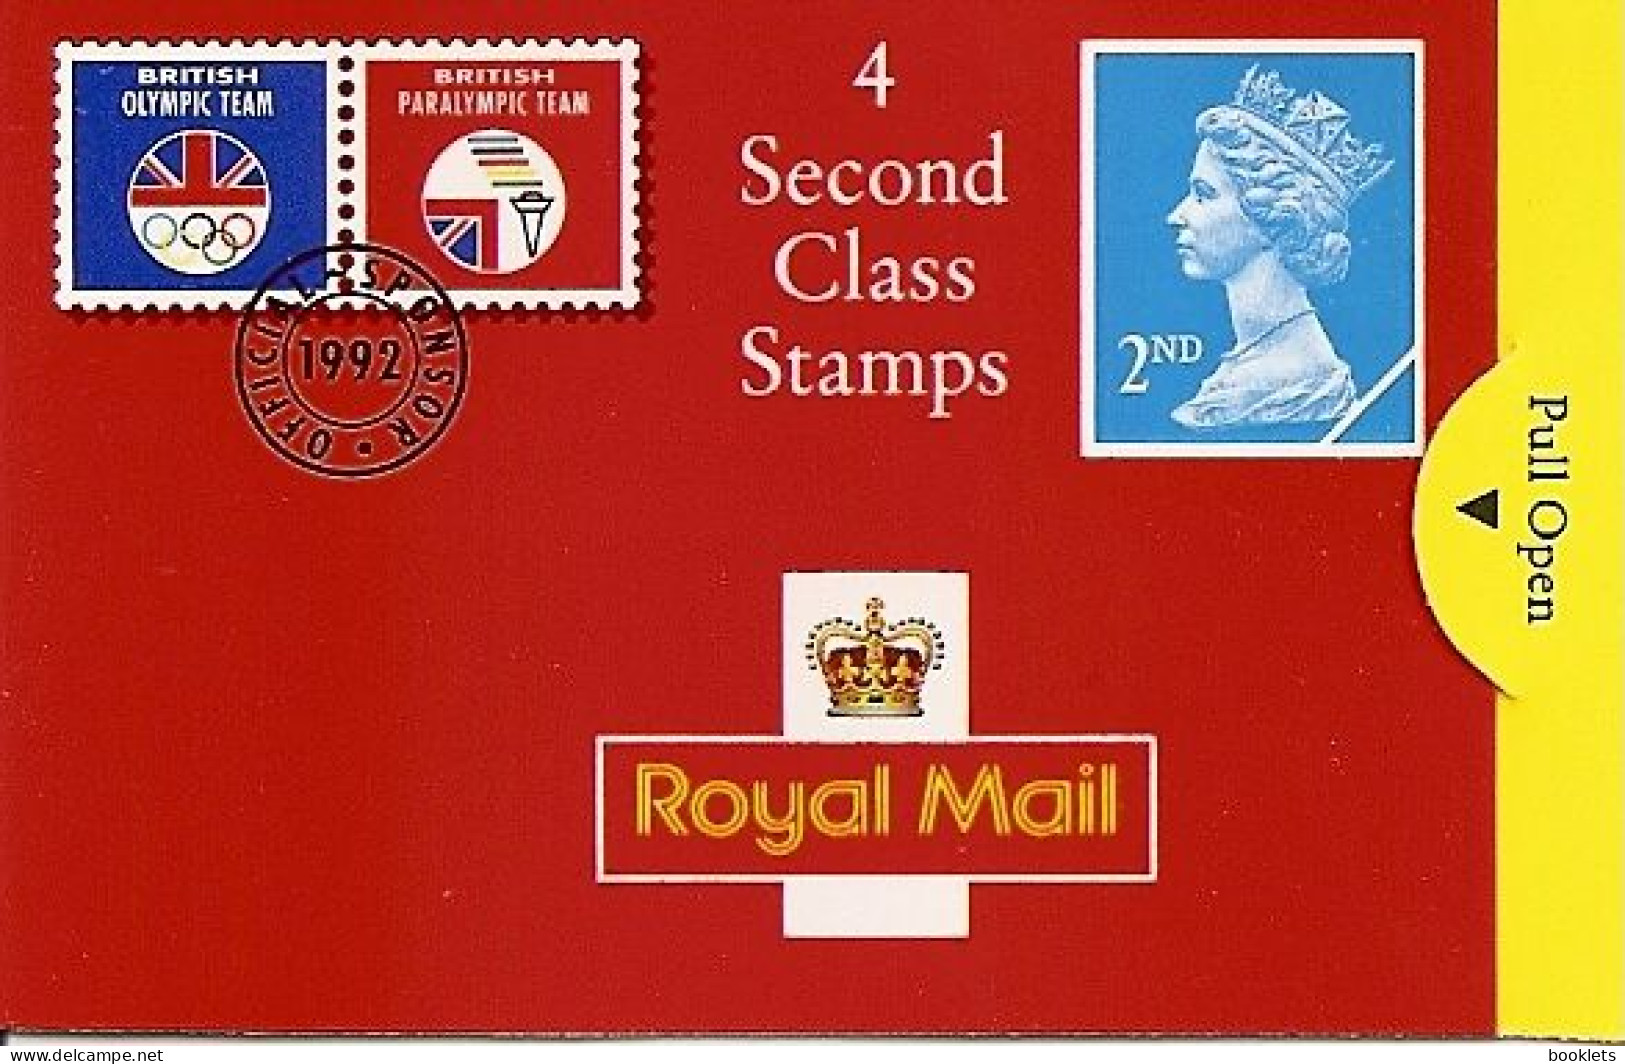 GREAT BRITAIN, WINDOW BOOKLET (RETAIL), 1992, HA5, 4x 2nd - Booklets